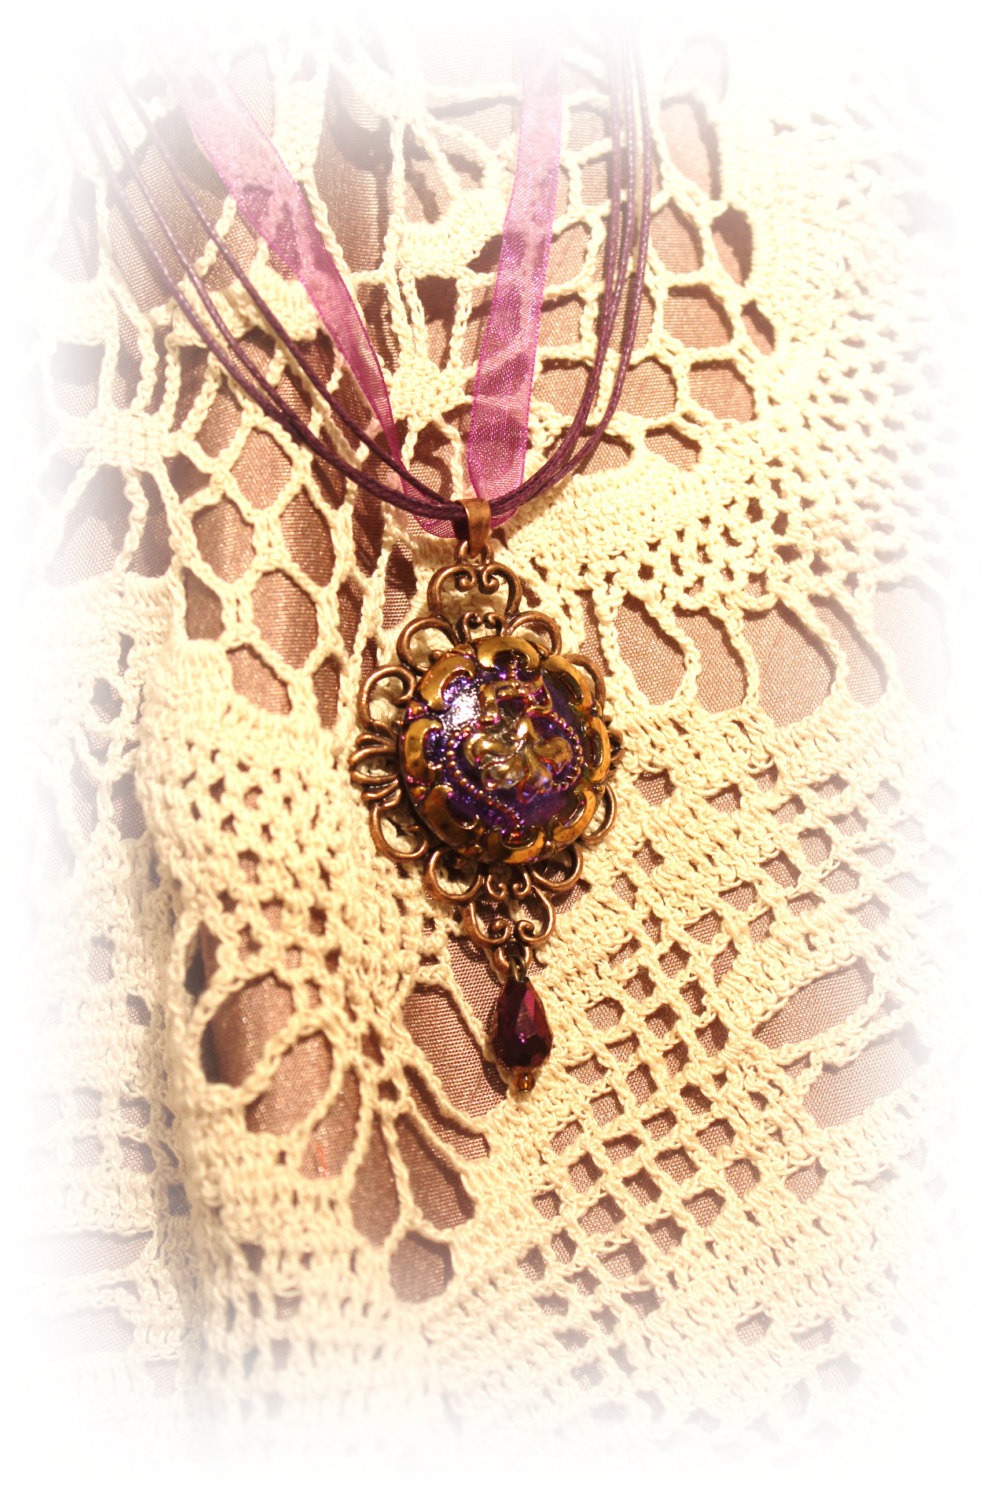 Czech Glass Button Pendant Necklace - Irridescent Purple on Rose Gold with a teardrop dangle bead - Victorian Steampunk Taffeta cord Jewelry steampunk buy now online